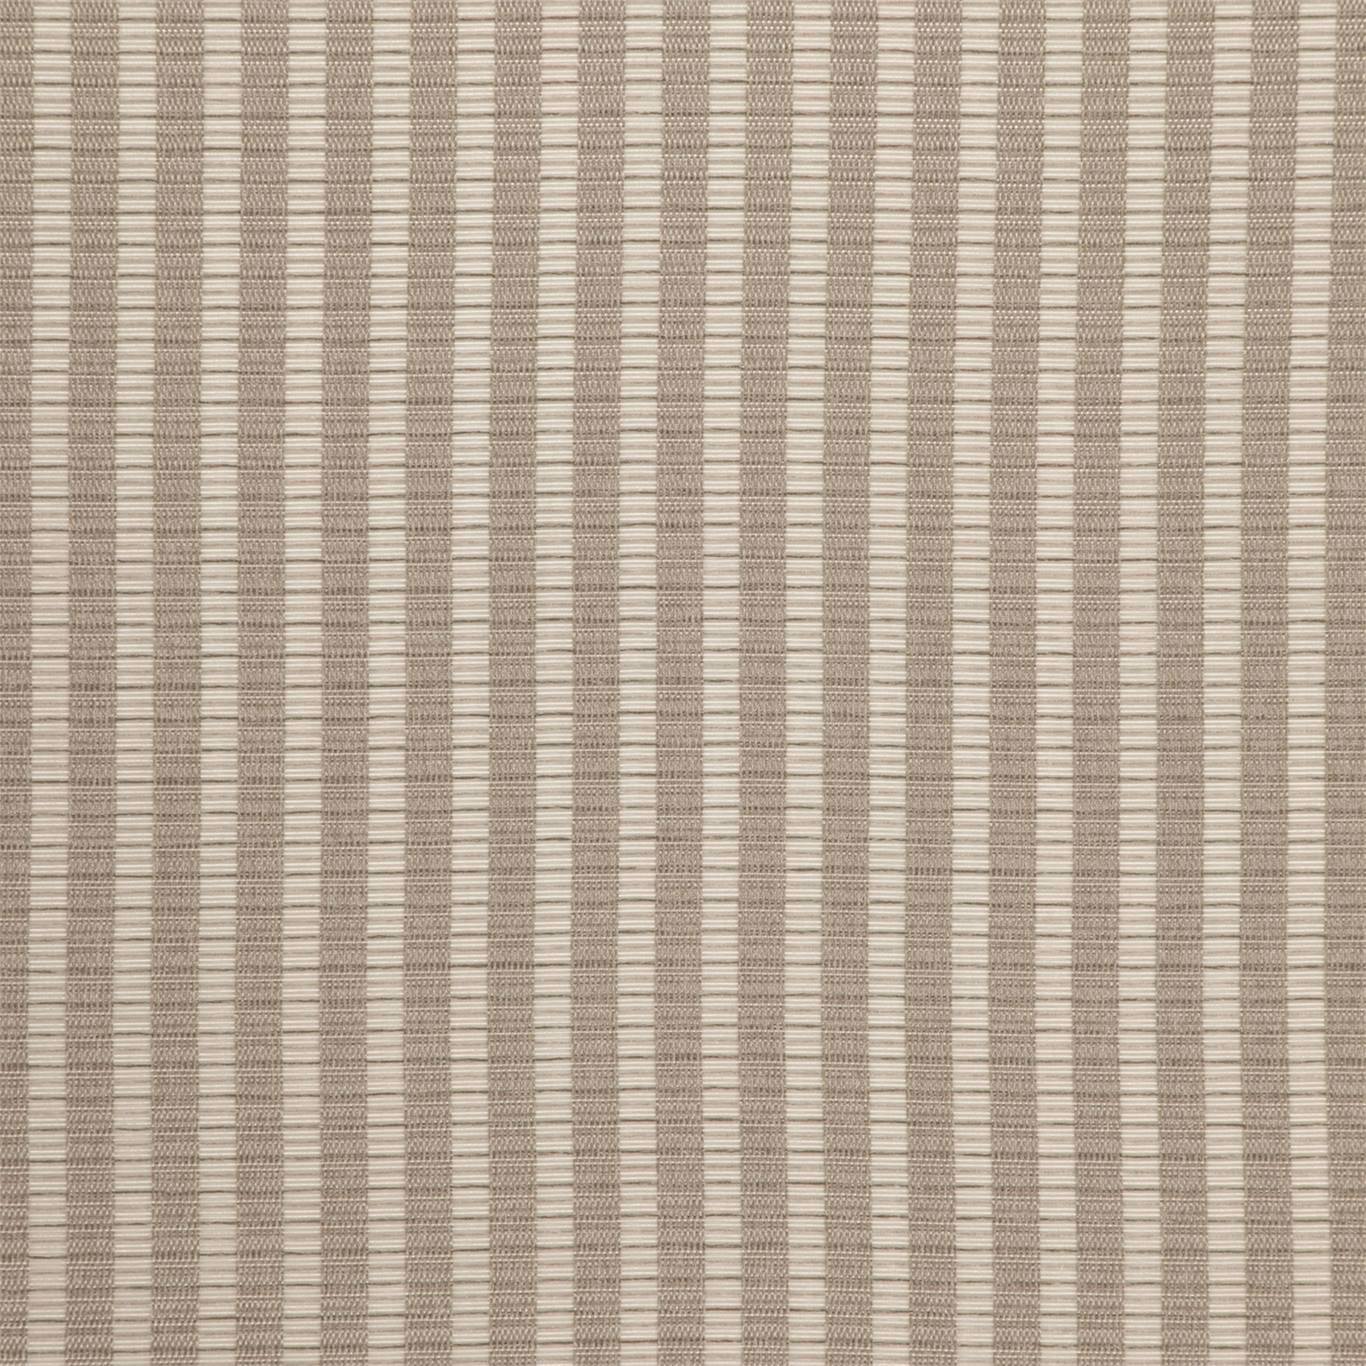 Anthem Fabric by Harlequin - HSYM143096 - Oyster